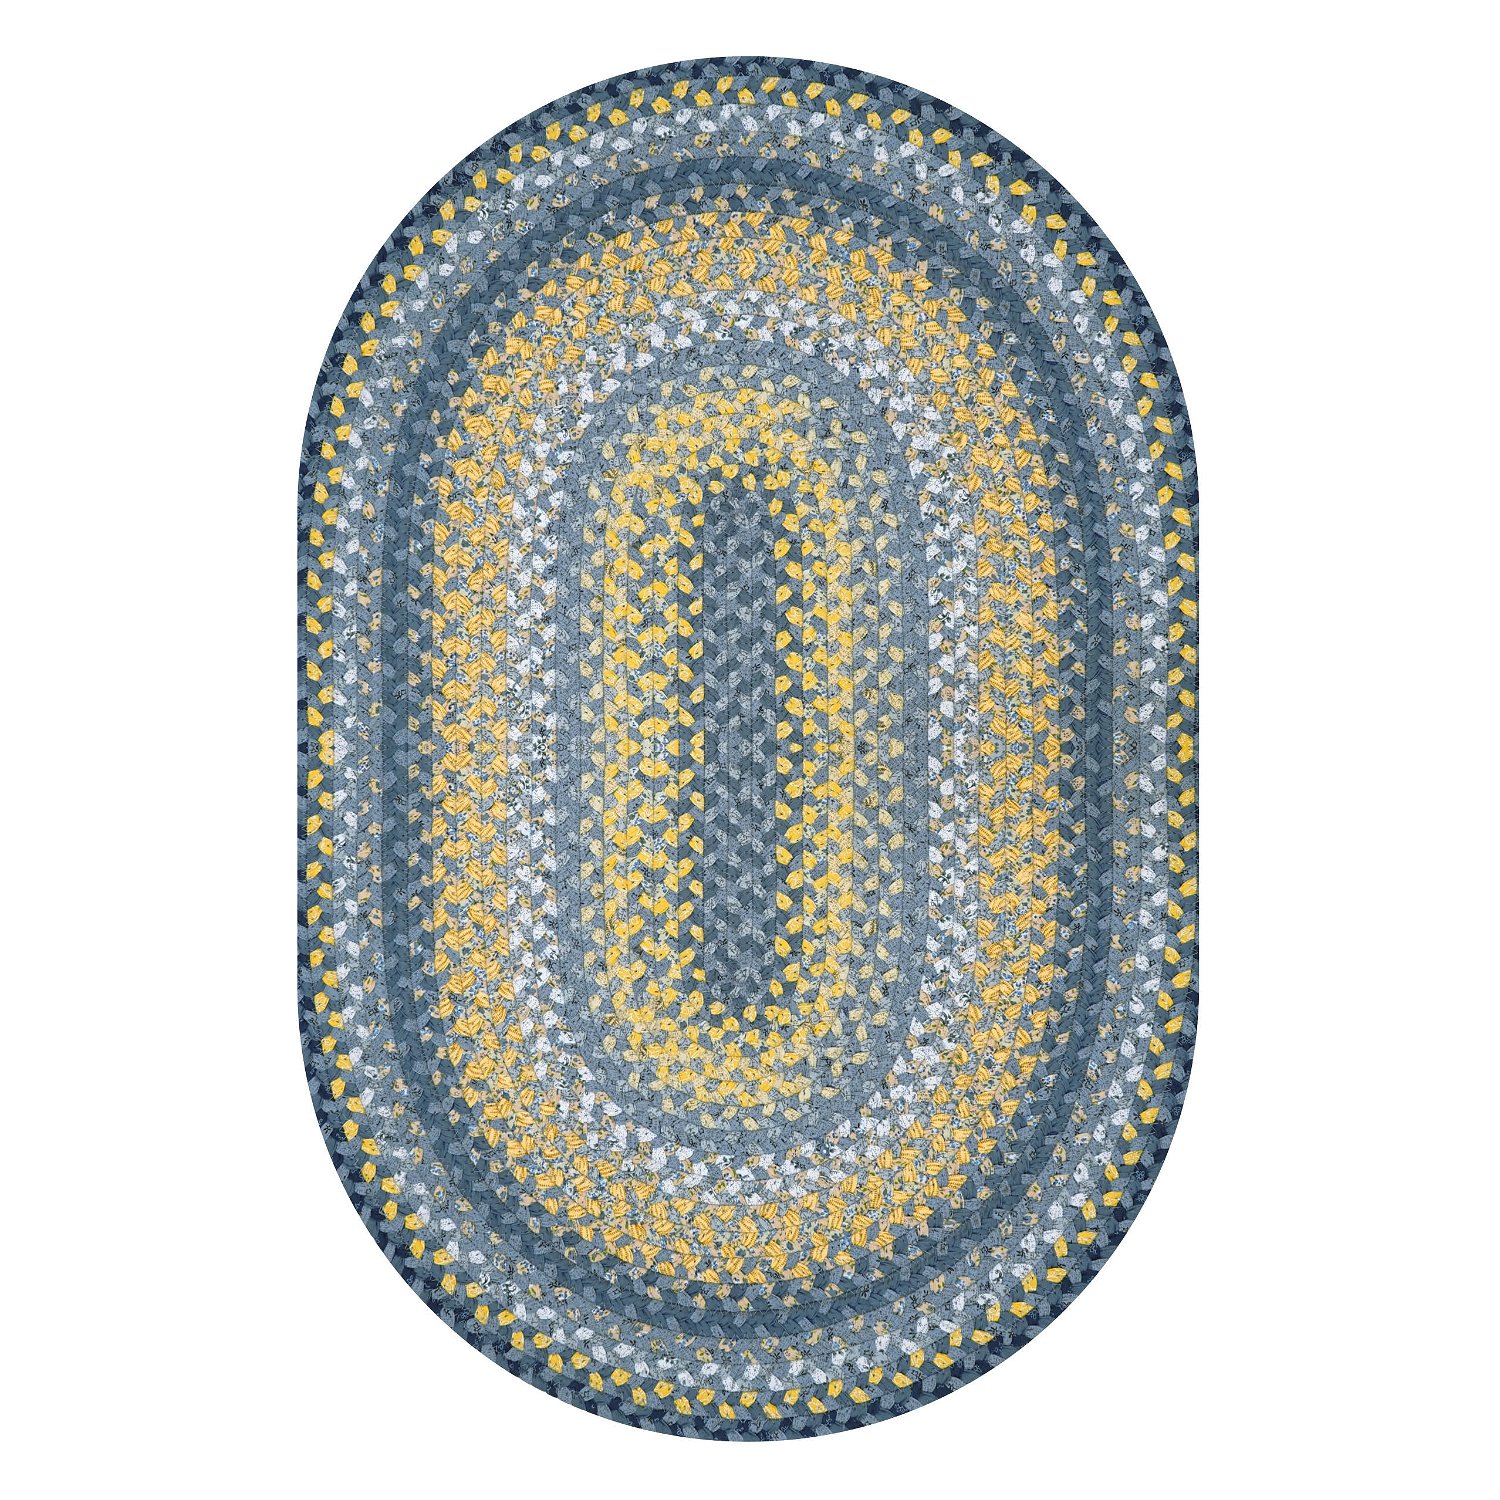 Sunflowers Bright Yellow-Blue Oval Cotton Braided Rugs Reversible